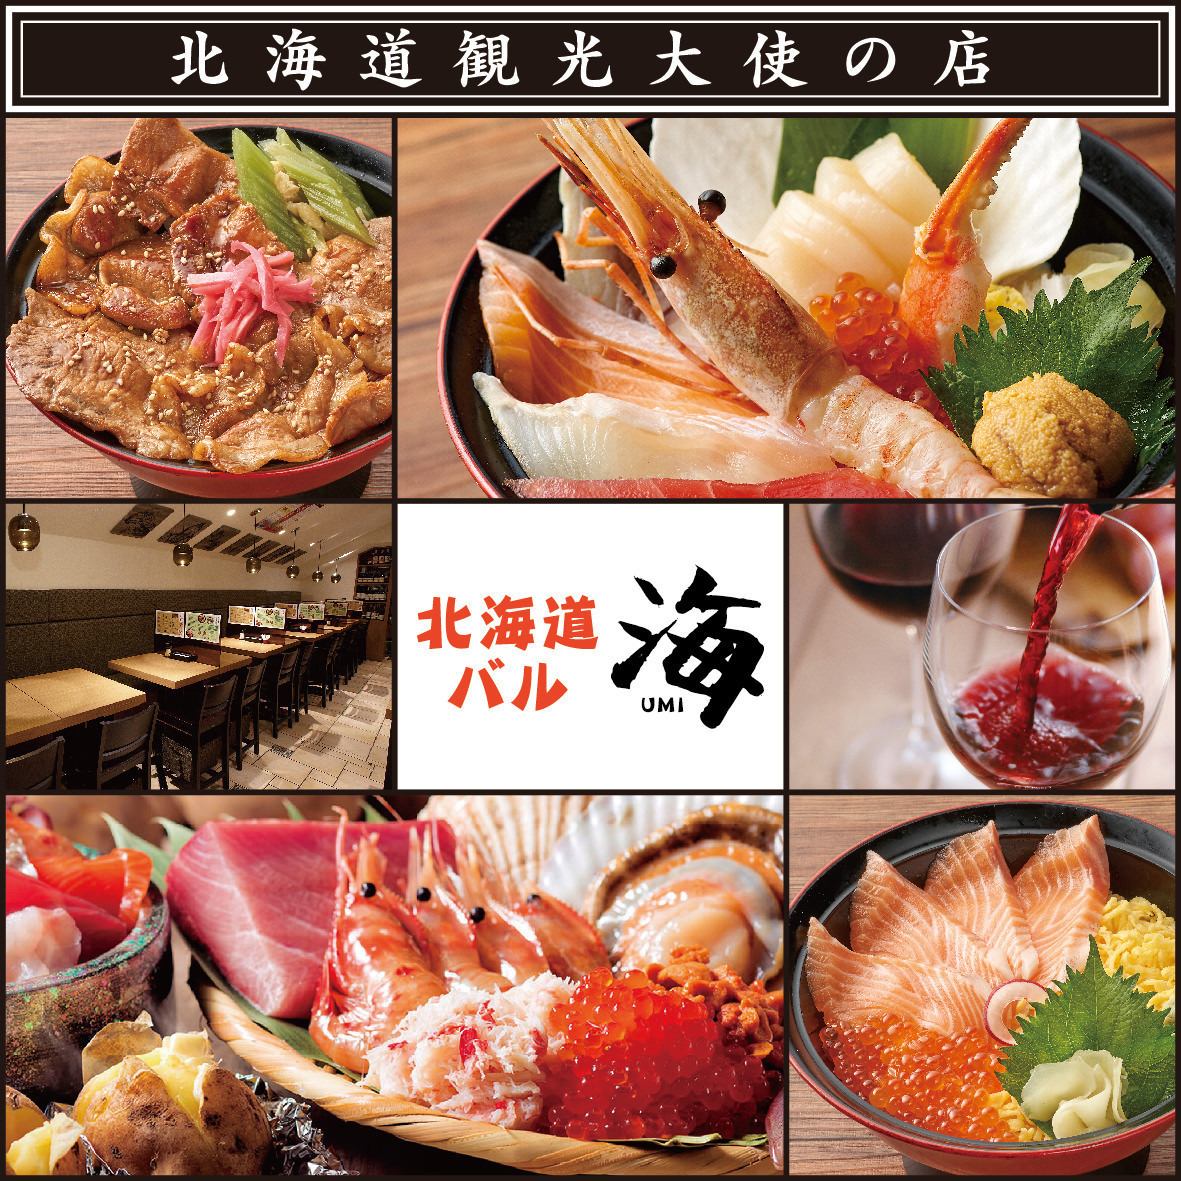 We are particular about freshness and quality, and you can enjoy Hokkaido ingredients at a reasonable price.